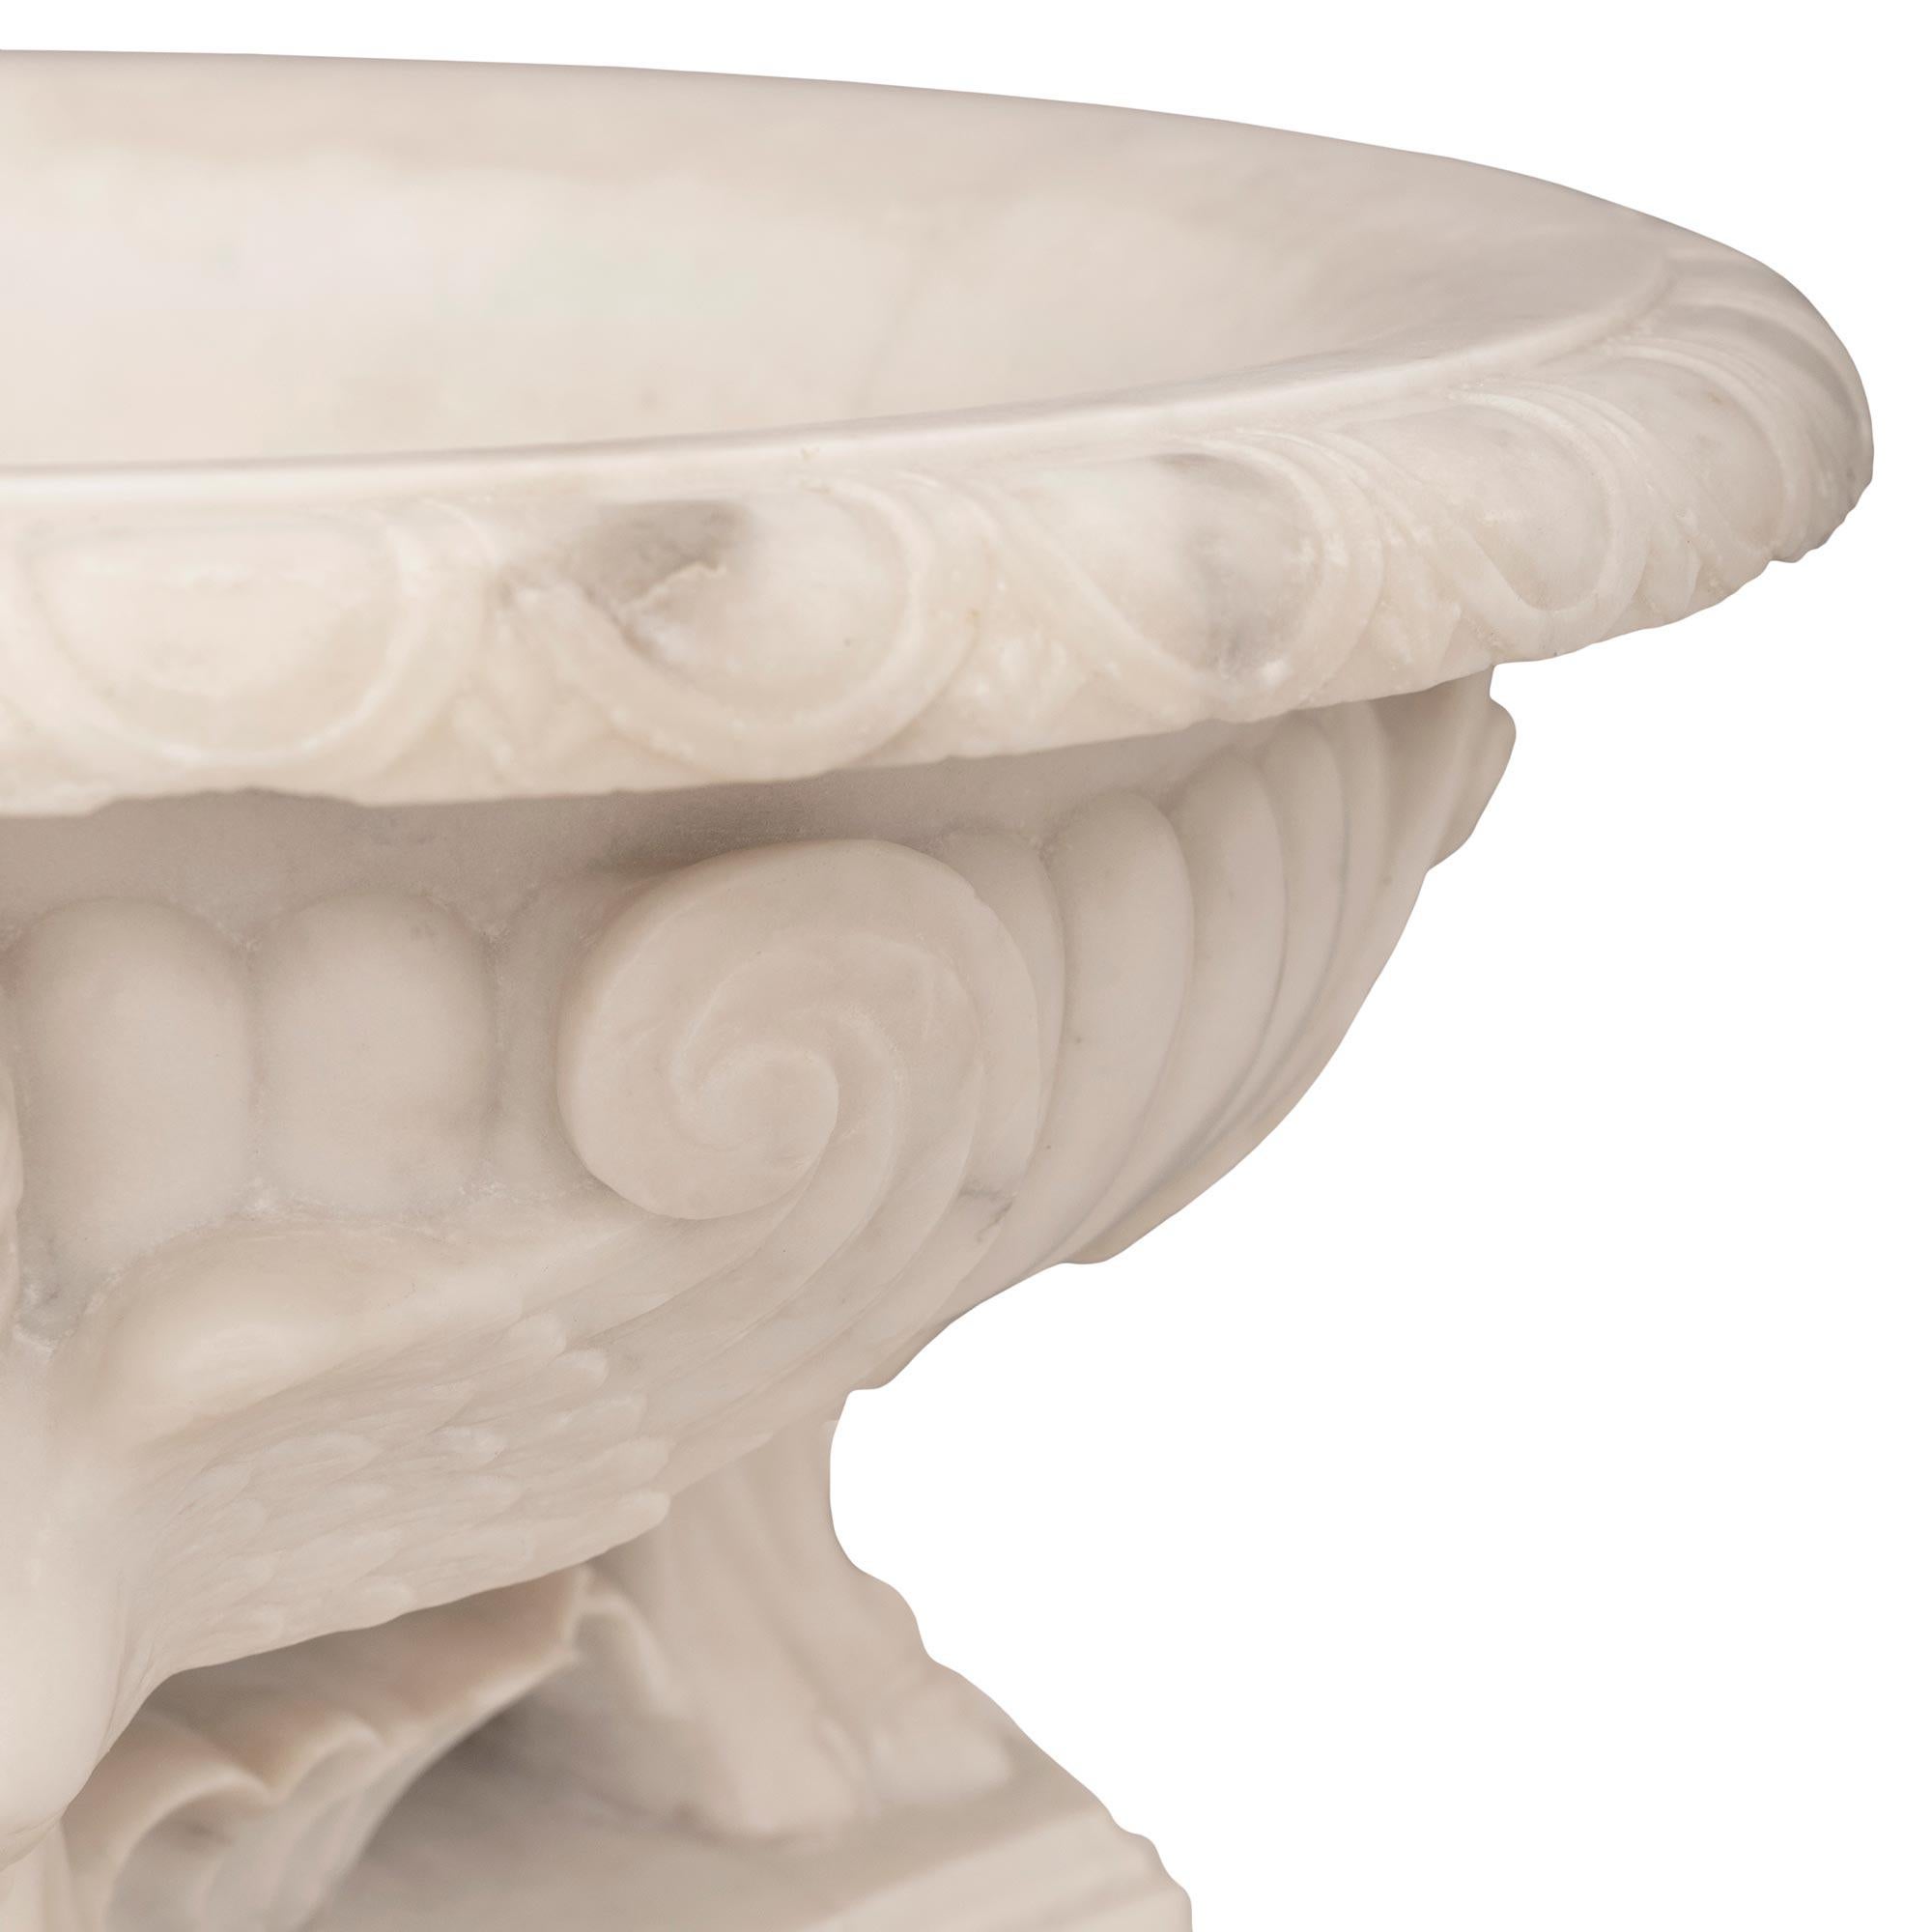 Italian 19th Century Neo-Classical St. White Carrara Marble Centerpiece Bowl For Sale 2